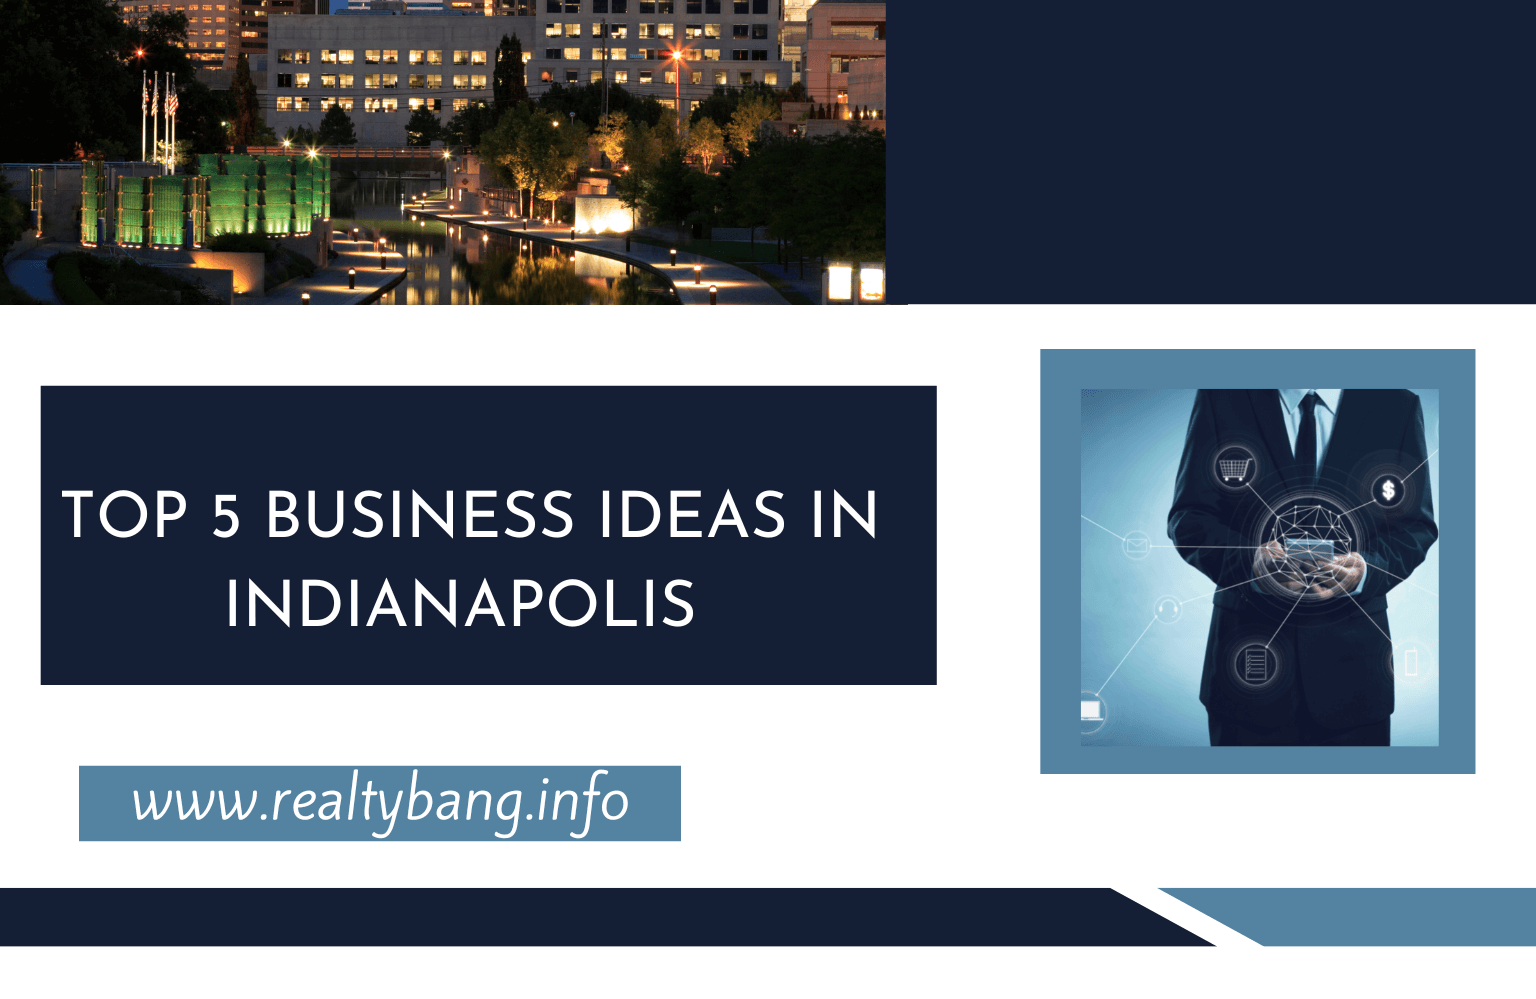 TOP 5 BUSINESS IDEAS IN INDIANAPOLIS